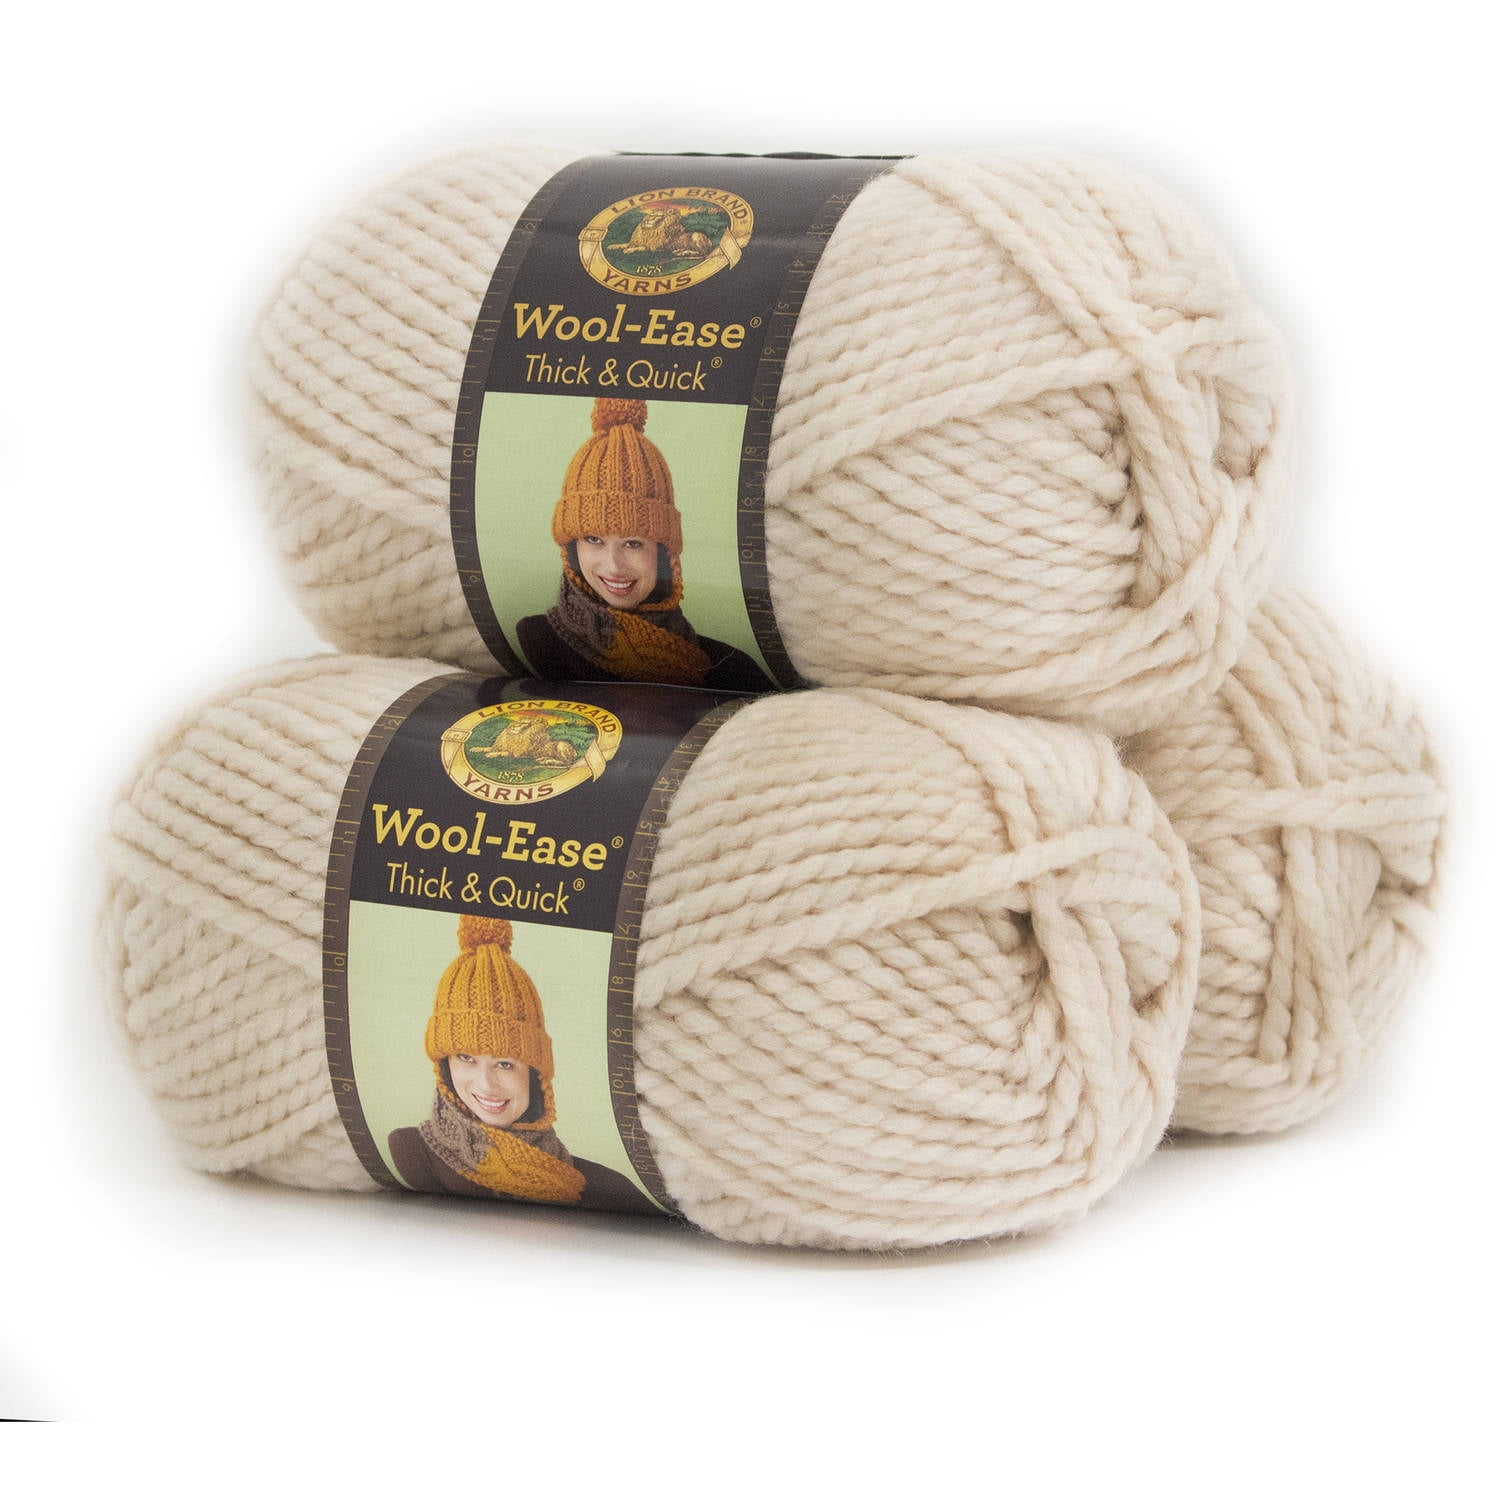  Lion Brand Hue + Me Yarn for Knitting, Crocheting, and  Crafting, Bulky and Thick, Soft Acrylic and Wool Yarn, Saffron (3-Pack)